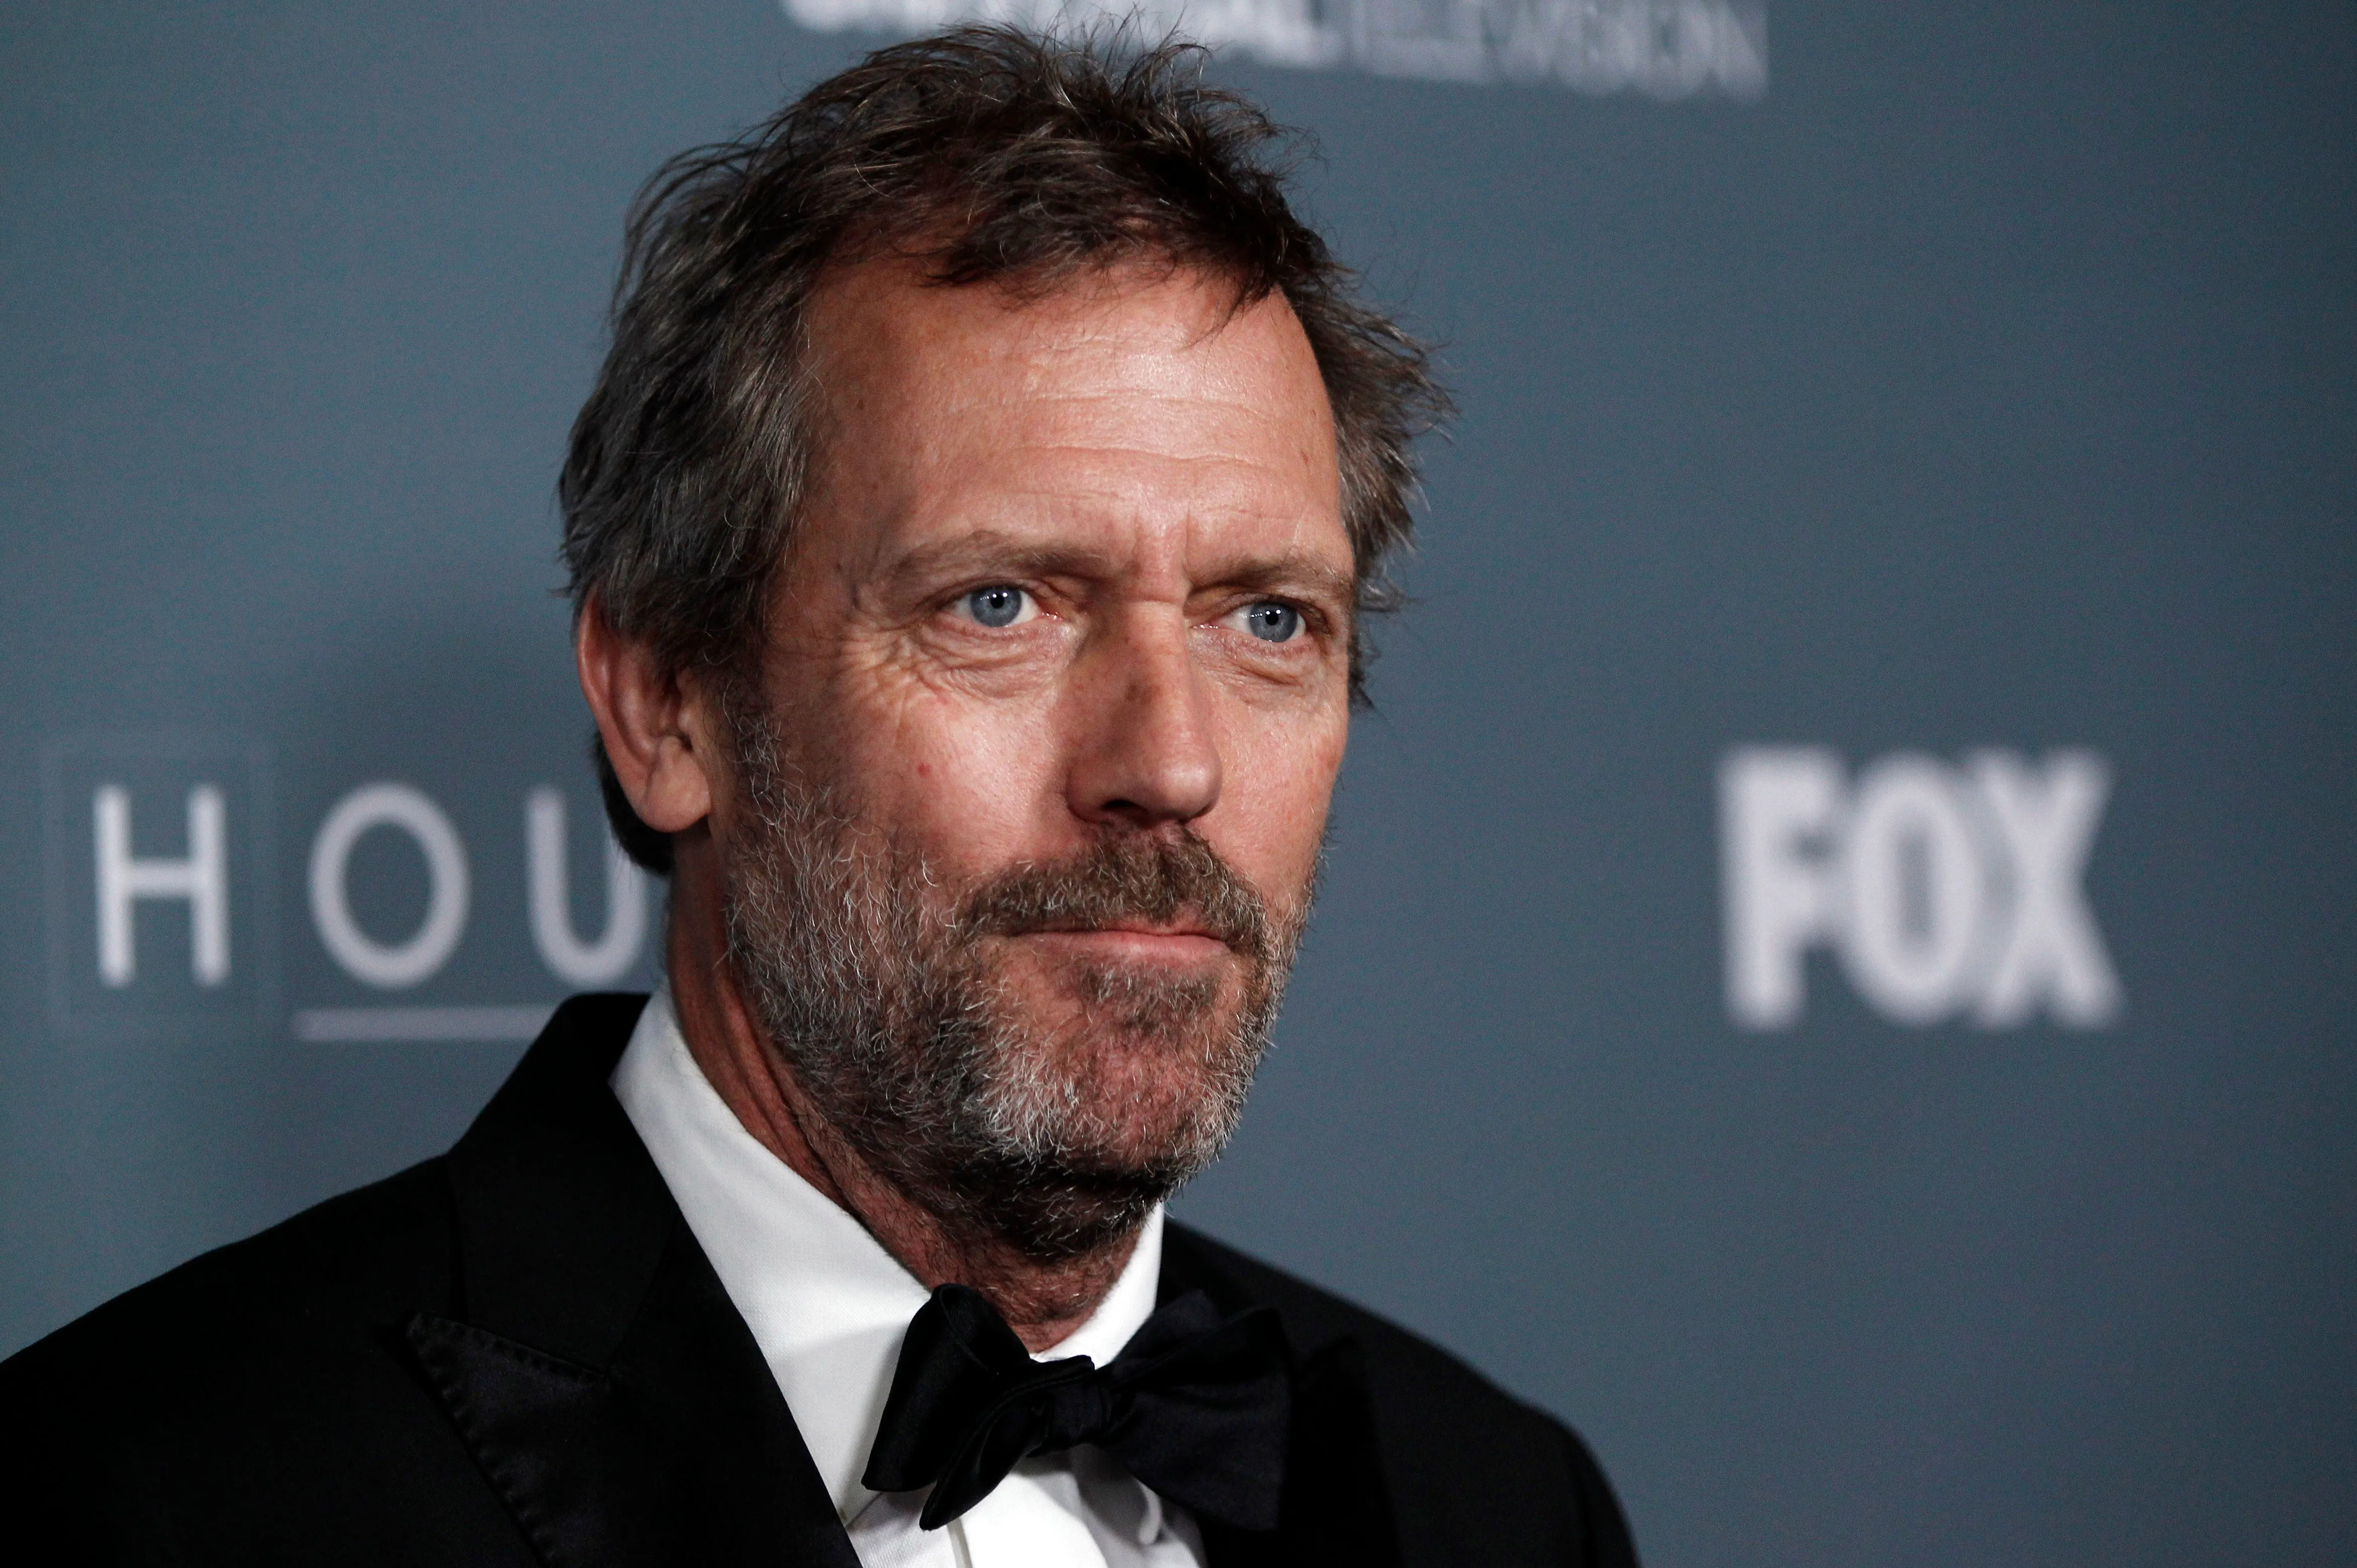 TV's Dr. House helps solve a real medical mystery